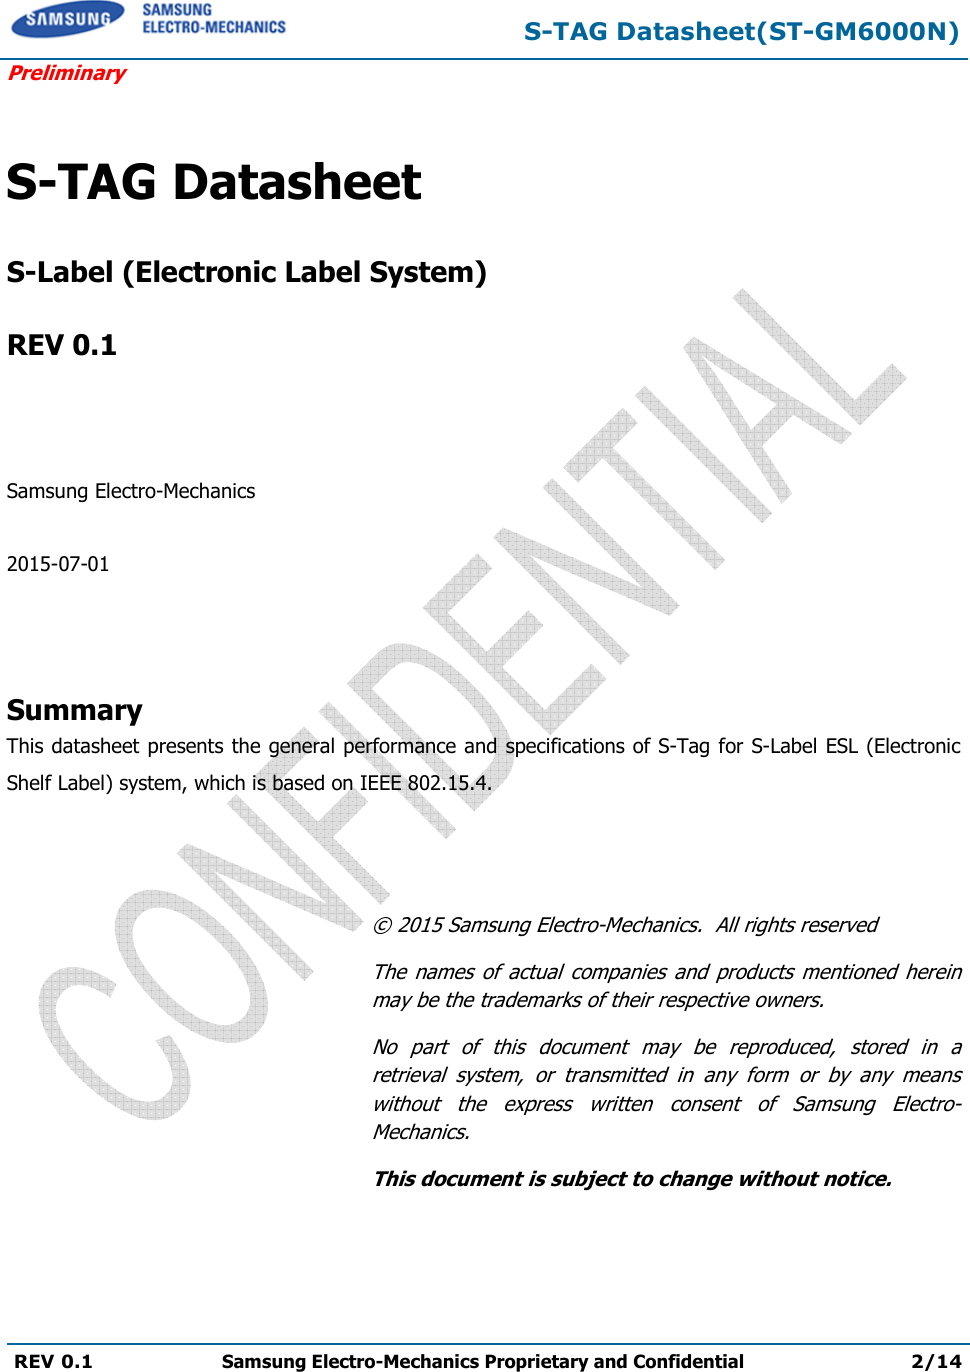  S-TAG Datasheet(ST-GM6000N) Preliminary REV 0.1  Samsung Electro-Mechanics Proprietary and Confidential 2/14    S-TAG Datasheet   S-Label (Electronic Label System)  REV 0.1    Samsung Electro-Mechanics  2015-07-01    Summary This datasheet presents the general performance and specifications of S-Tag for S-Label ESL (Electronic Shelf Label) system, which is based on IEEE 802.15.4.    © 2015 Samsung Electro-Mechanics.  All rights reserved The  names  of  actual  companies  and  products  mentioned  herein may be the trademarks of their respective owners. No  part  of  this  document  may  be  reproduced,  stored  in  a retrieval  system,  or  transmitted  in  any  form  or  by  any  means without  the  express  written  consent  of  Samsung  Electro-Mechanics. This document is subject to change without notice. 